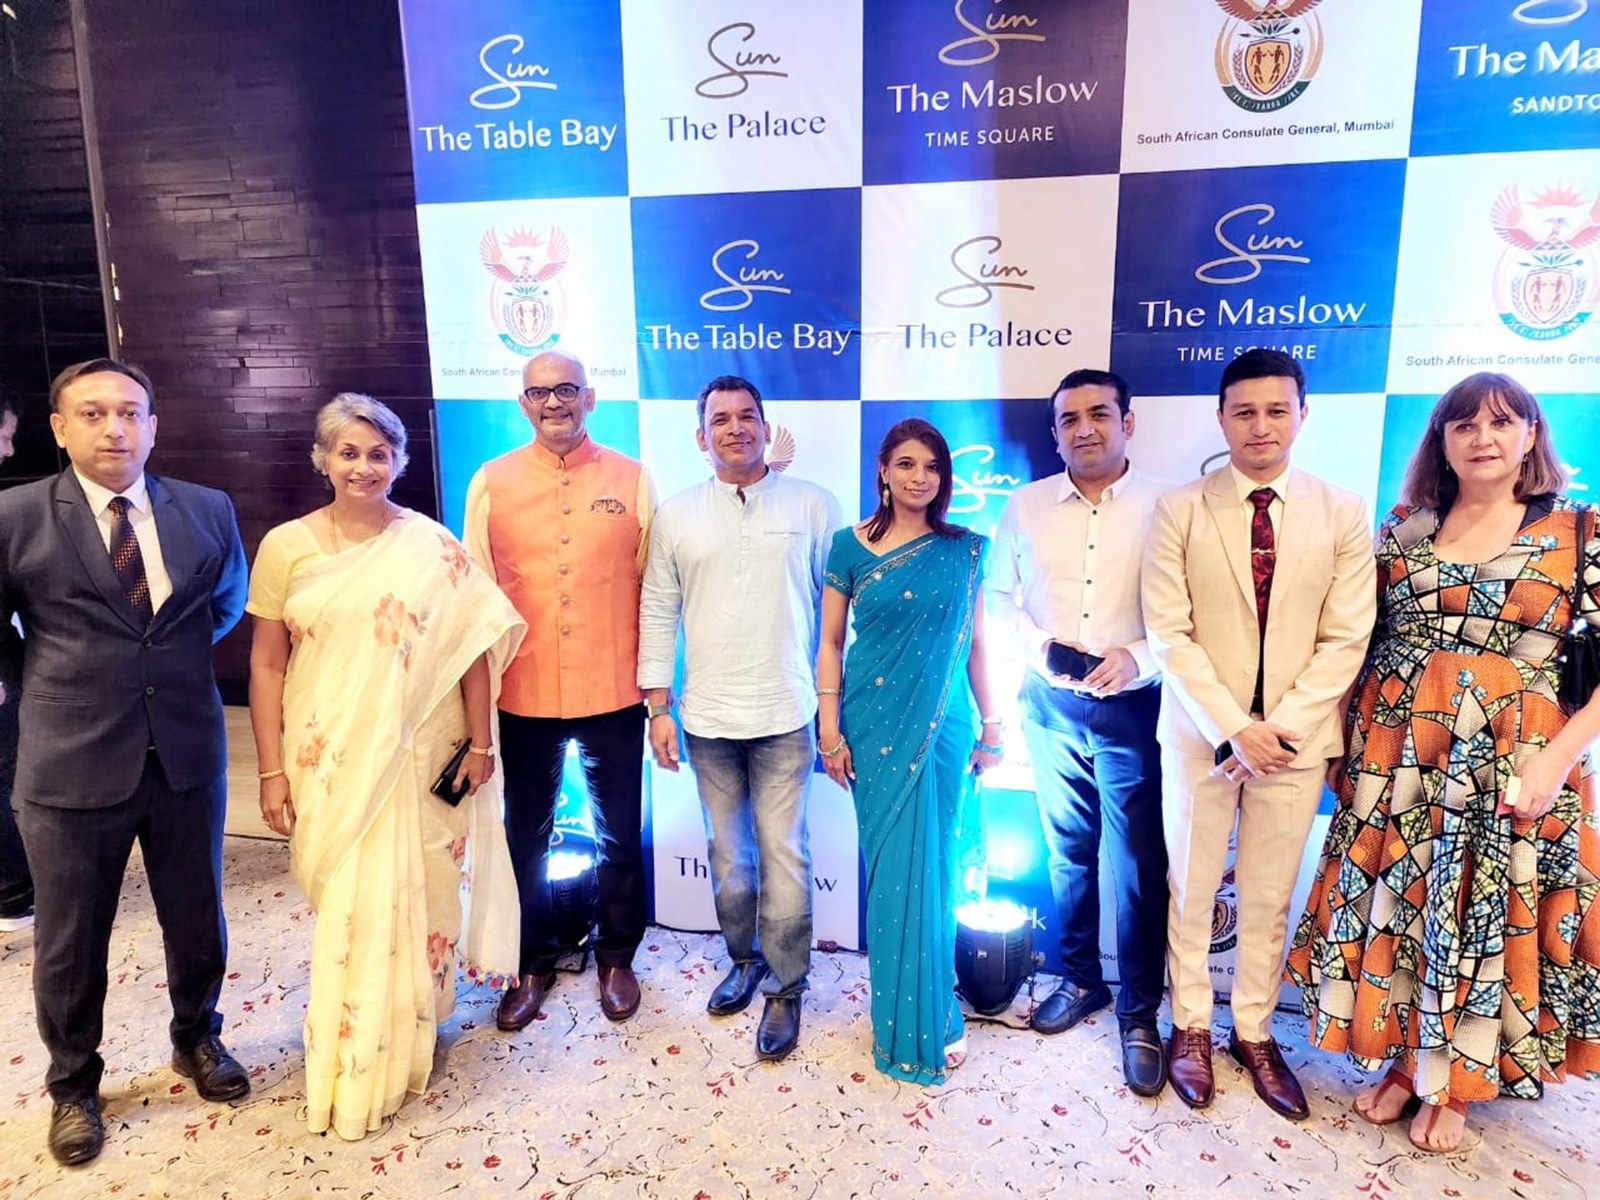 ‘Trade Appreciation Evening’ organised by Sun International in association with the South African Consulate General Mumbai, India and Airline partner Air Seychelles in Mumbai on June 24th, 2022